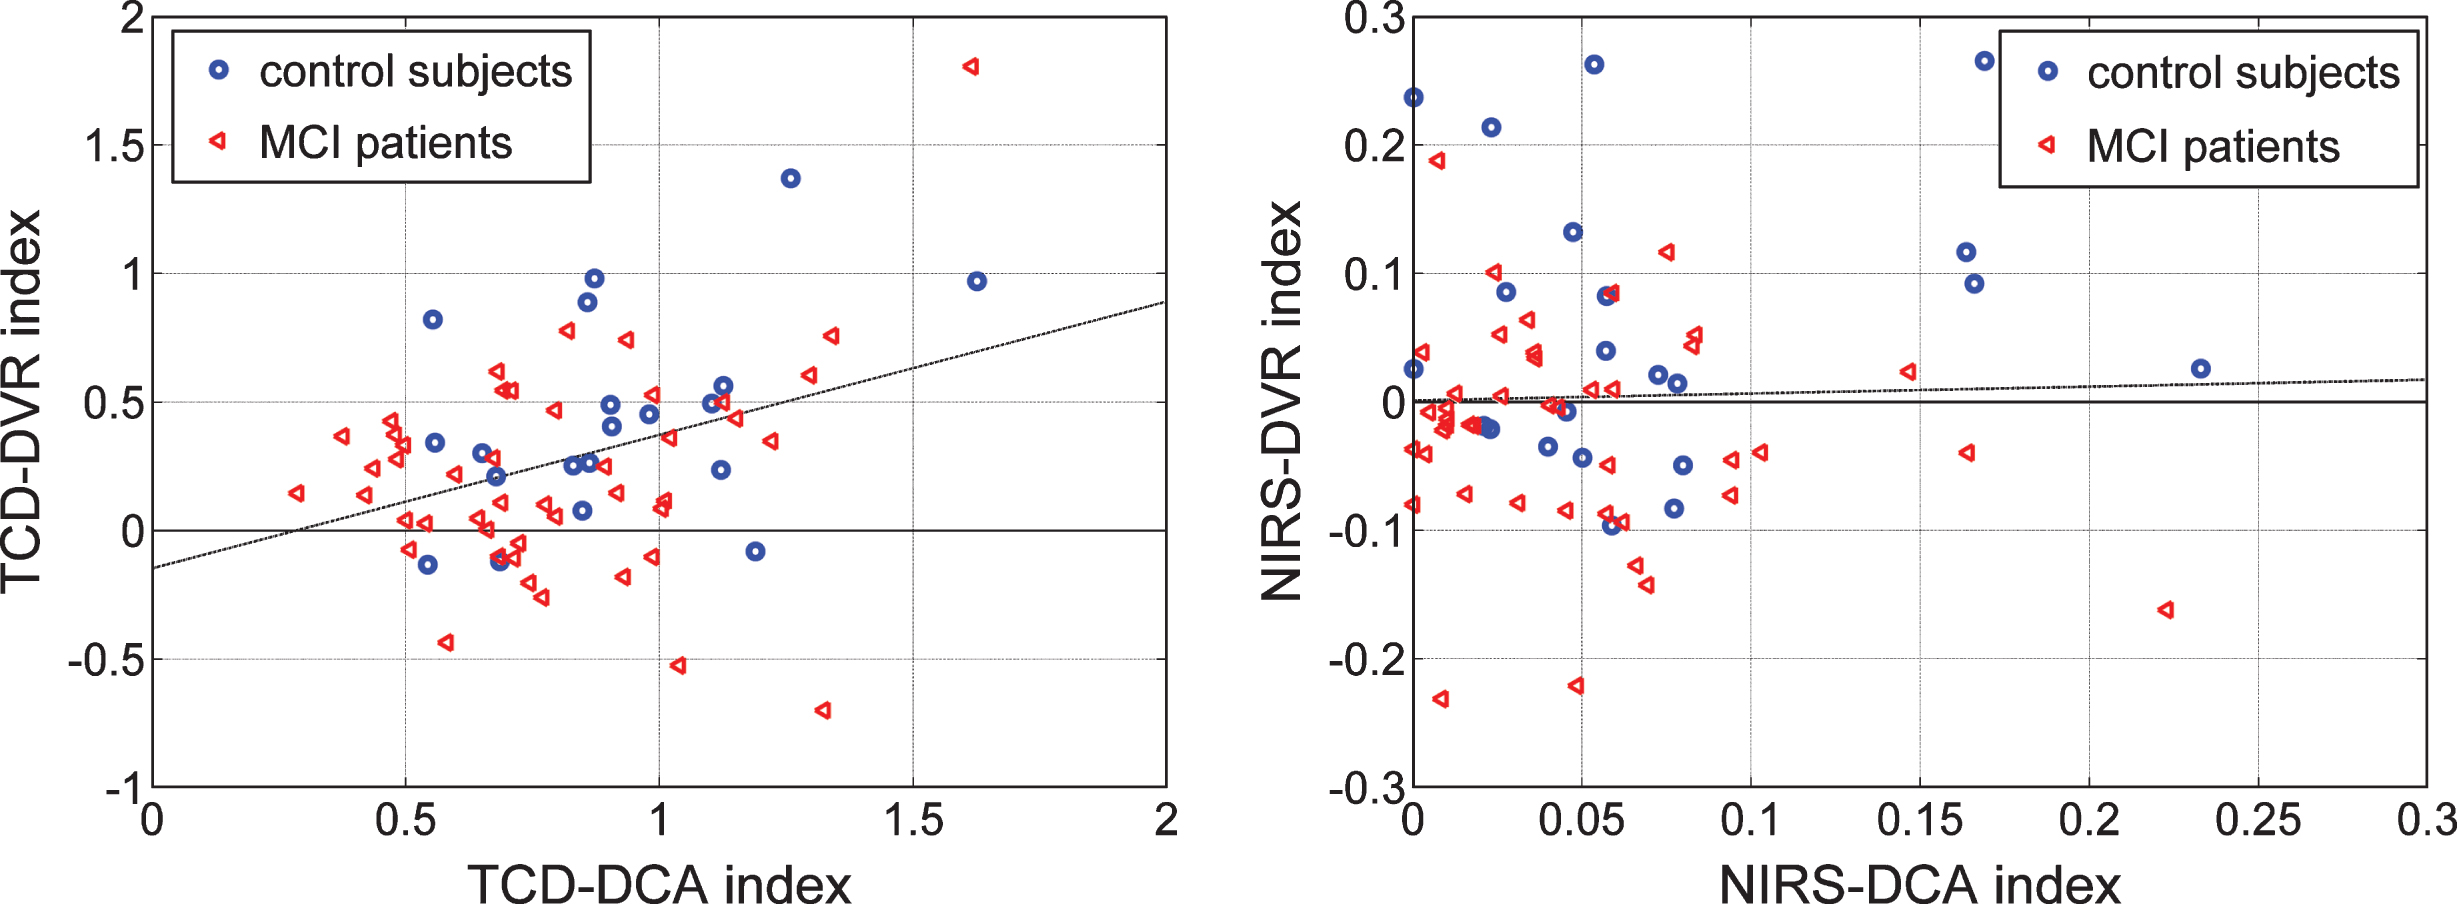 Scatter-plots of TCD-DCA versus TCD-DVR indices (left) and NIRS-DCA versus NIRS-DVR indices (right) for all controls (blue circles) and patients (red triangles) in each type of output recording. The regression lines correspond to correlation coefficients of 0.361 (p = 0.0028) and 0.028 (p = 0.8239) for the TCD and NIRS indices, respectively.